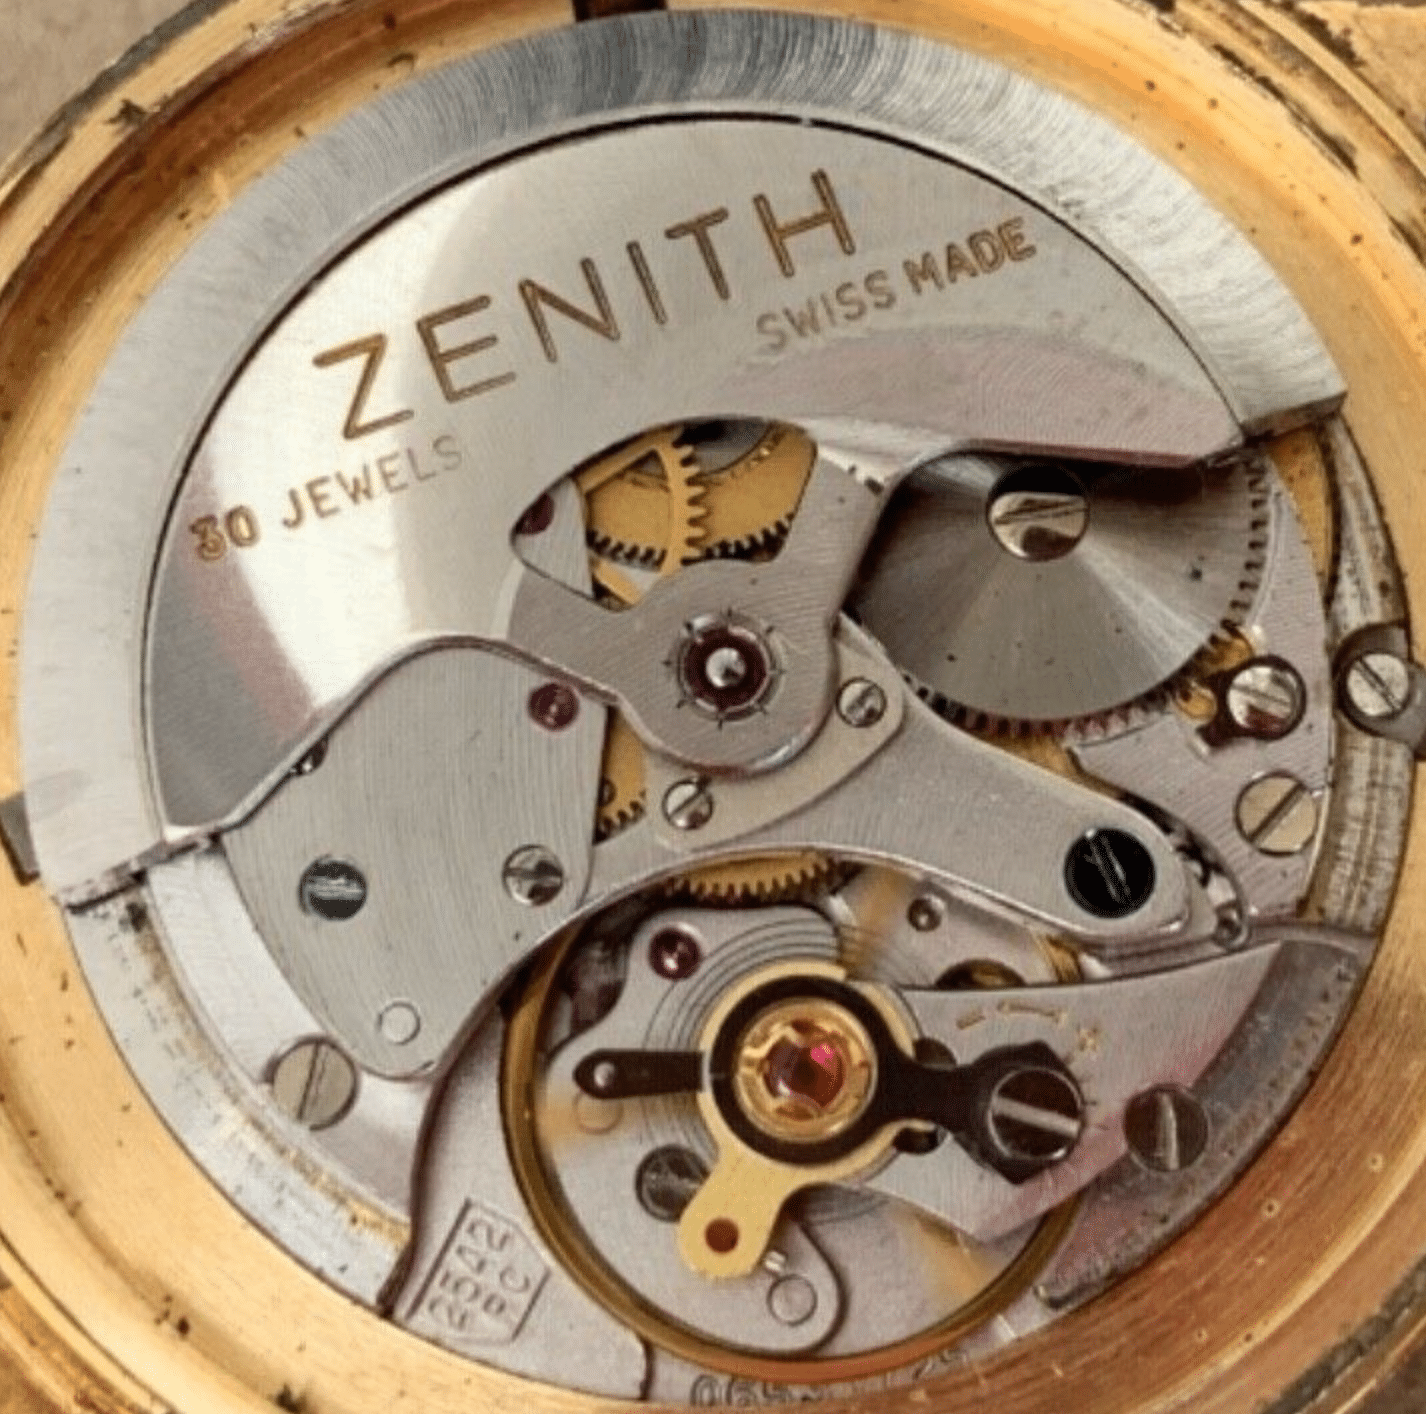 Zenith caliber 2532PC movement – specifications and photo